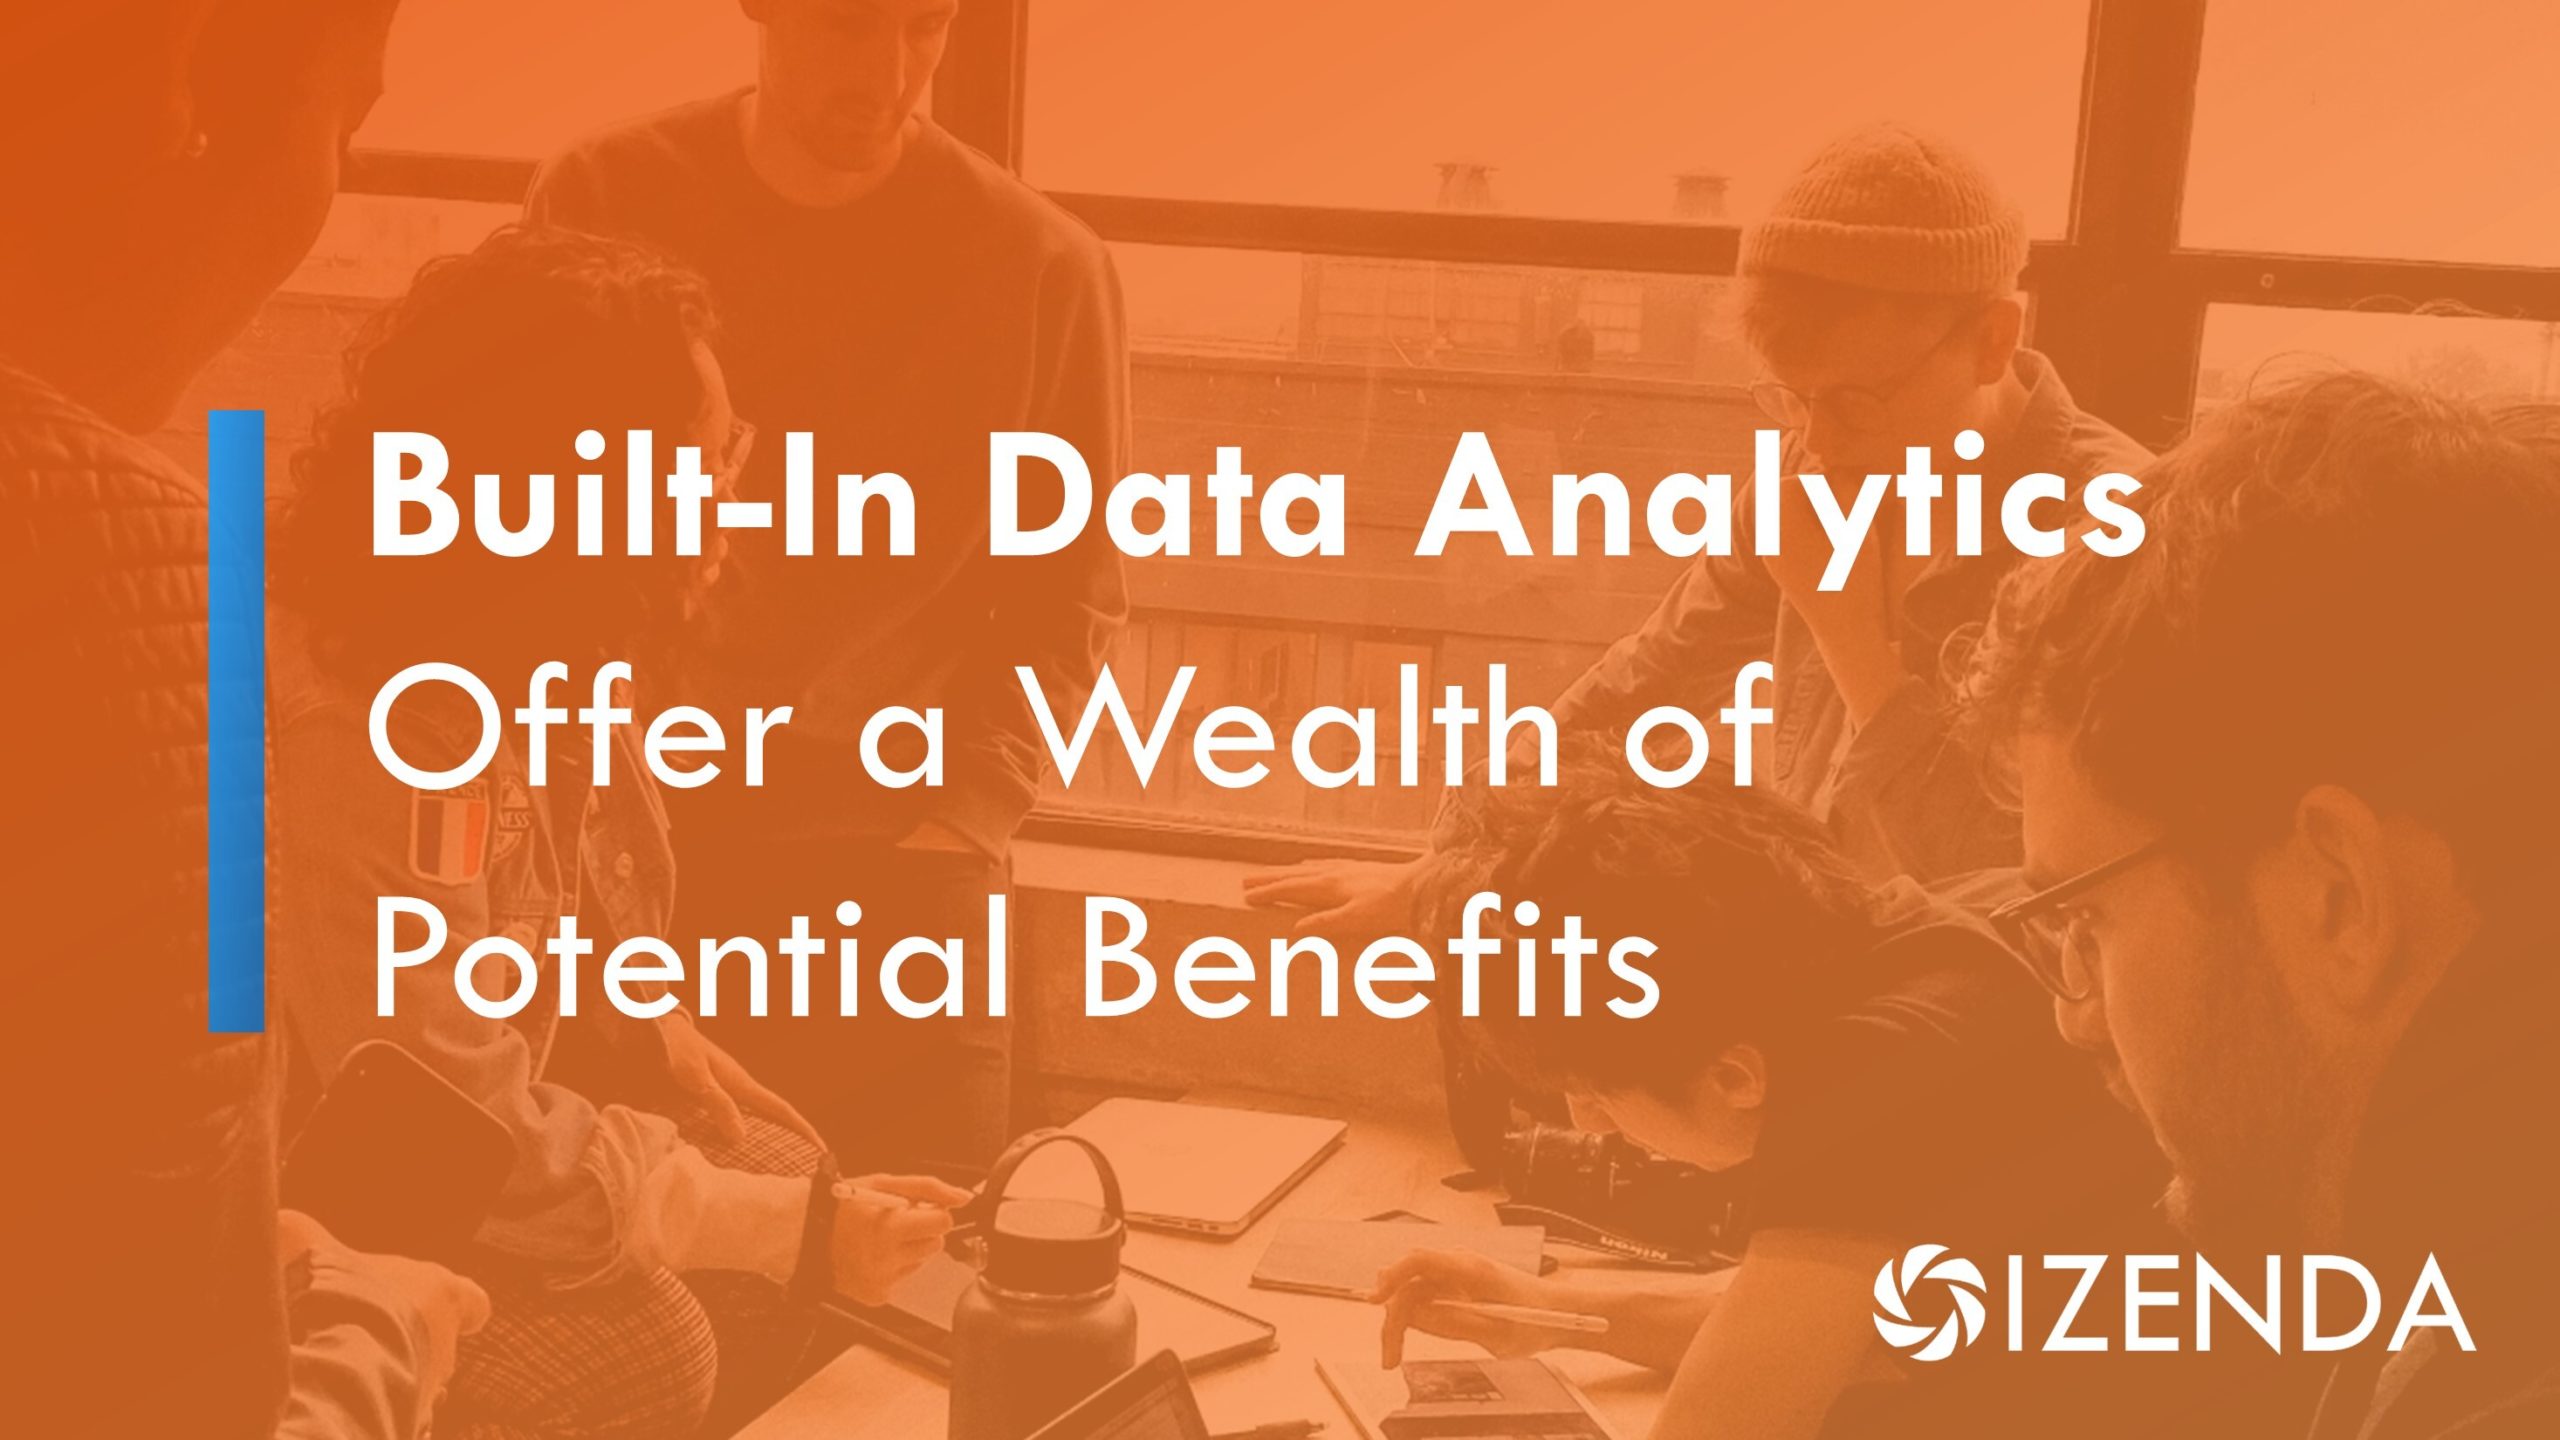 built-in embedded data analytics provides a wealth of potential benefits to all businesses